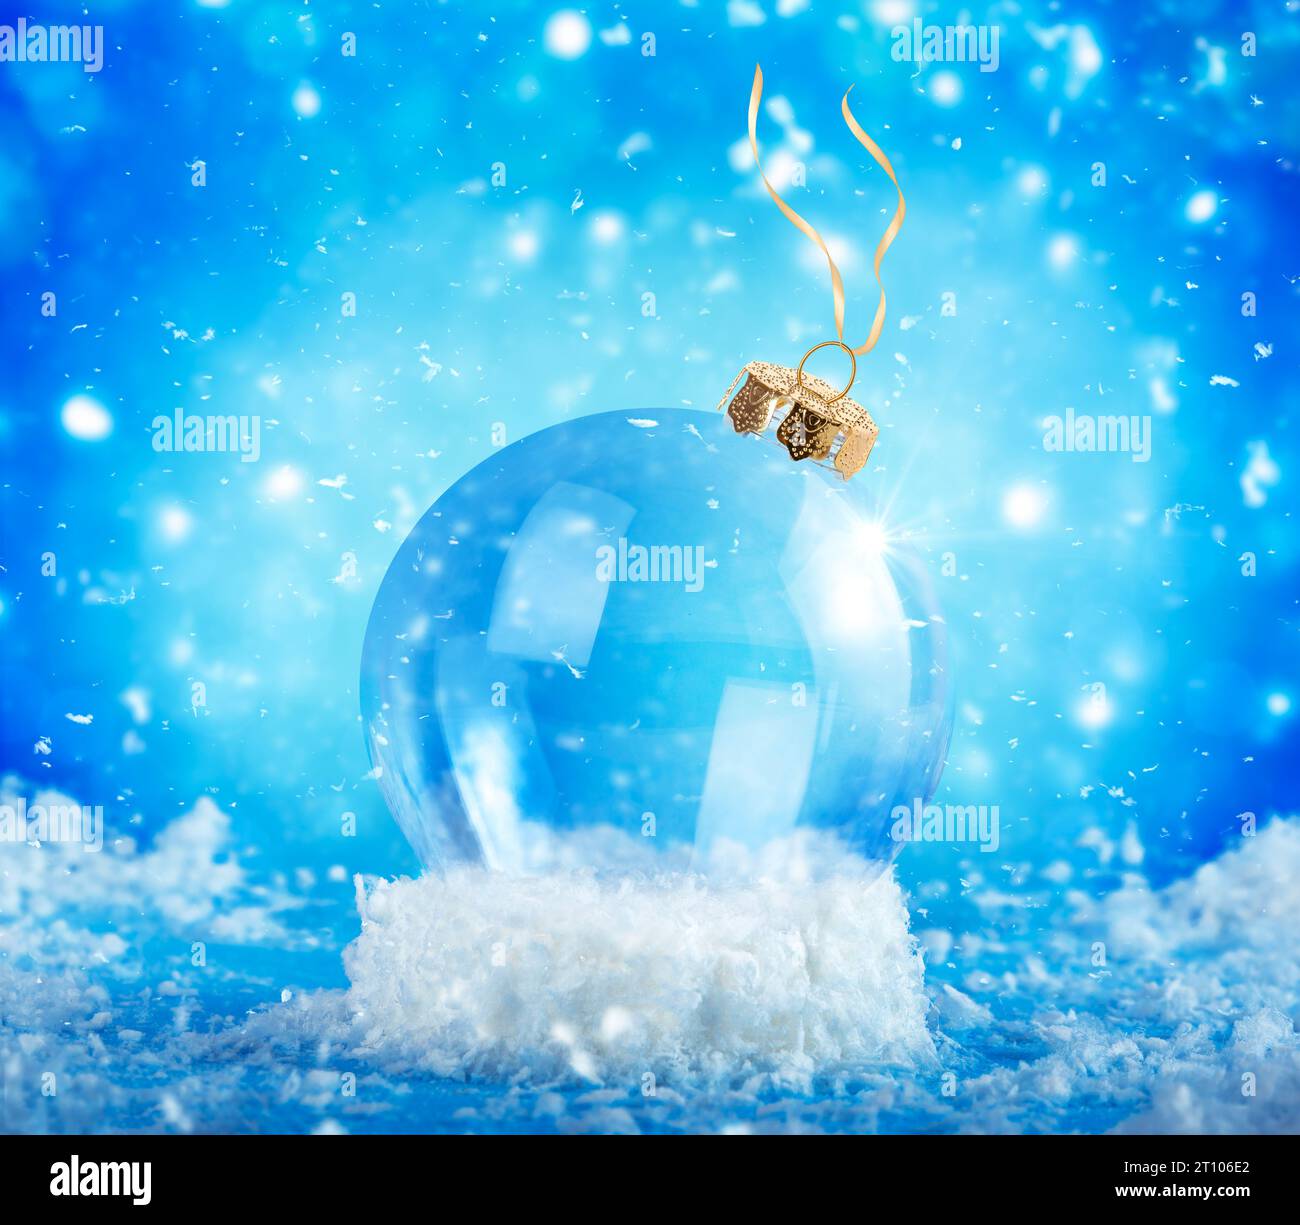 Christmas ornament, snow globe on blue snowing background. Stock Photo